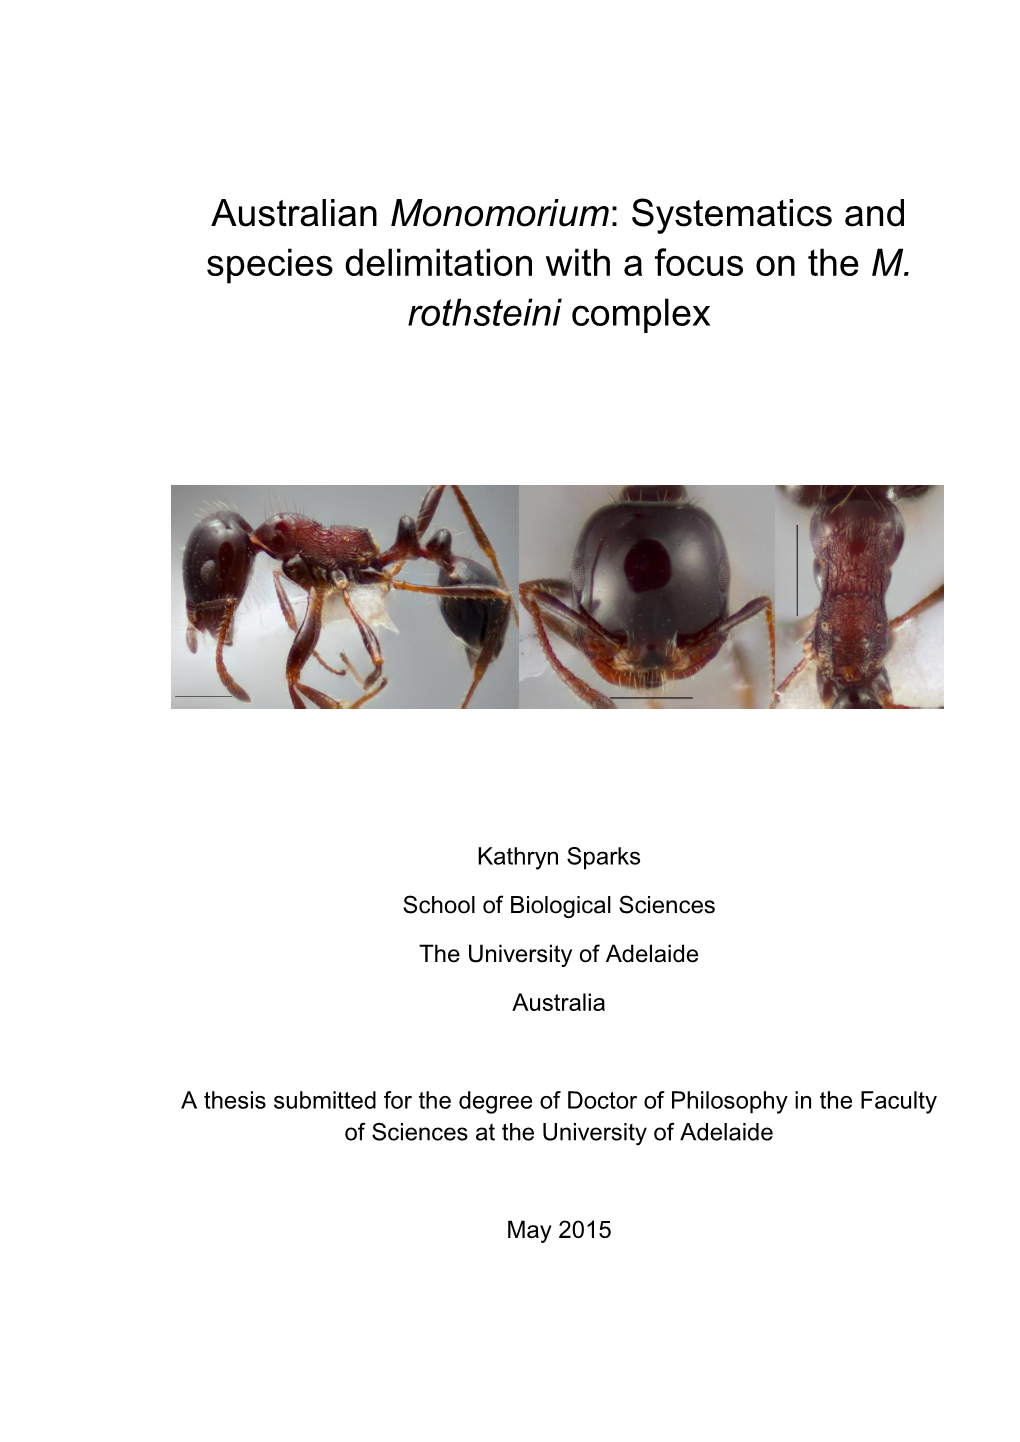 Australian Monomorium: Systematics and Species Delimitation with a Focus on the M